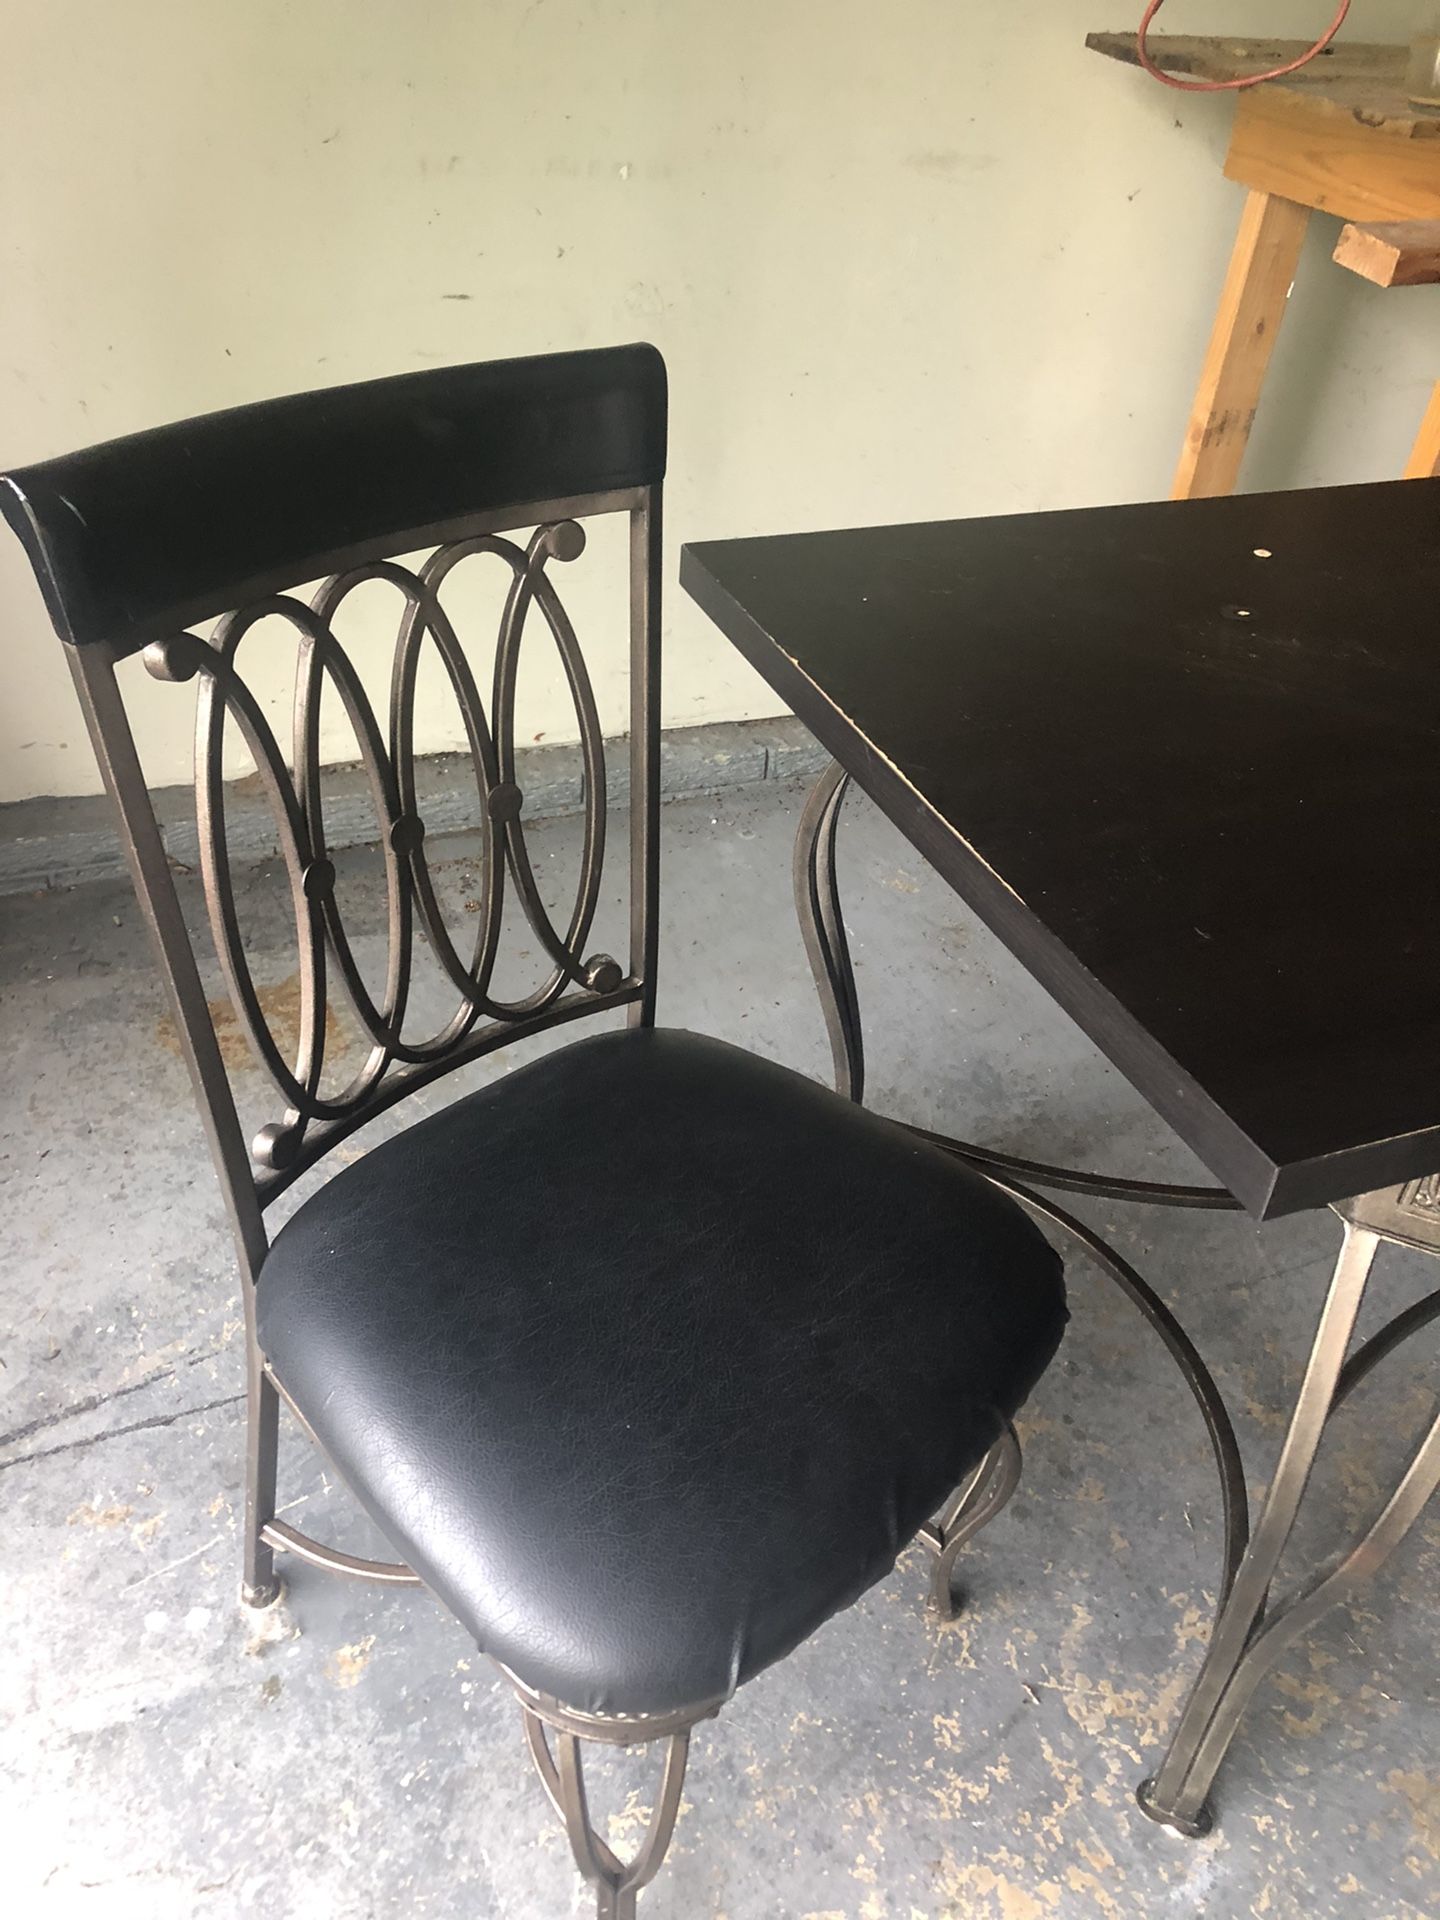 Dinning or kitchen table and 4 chairs.